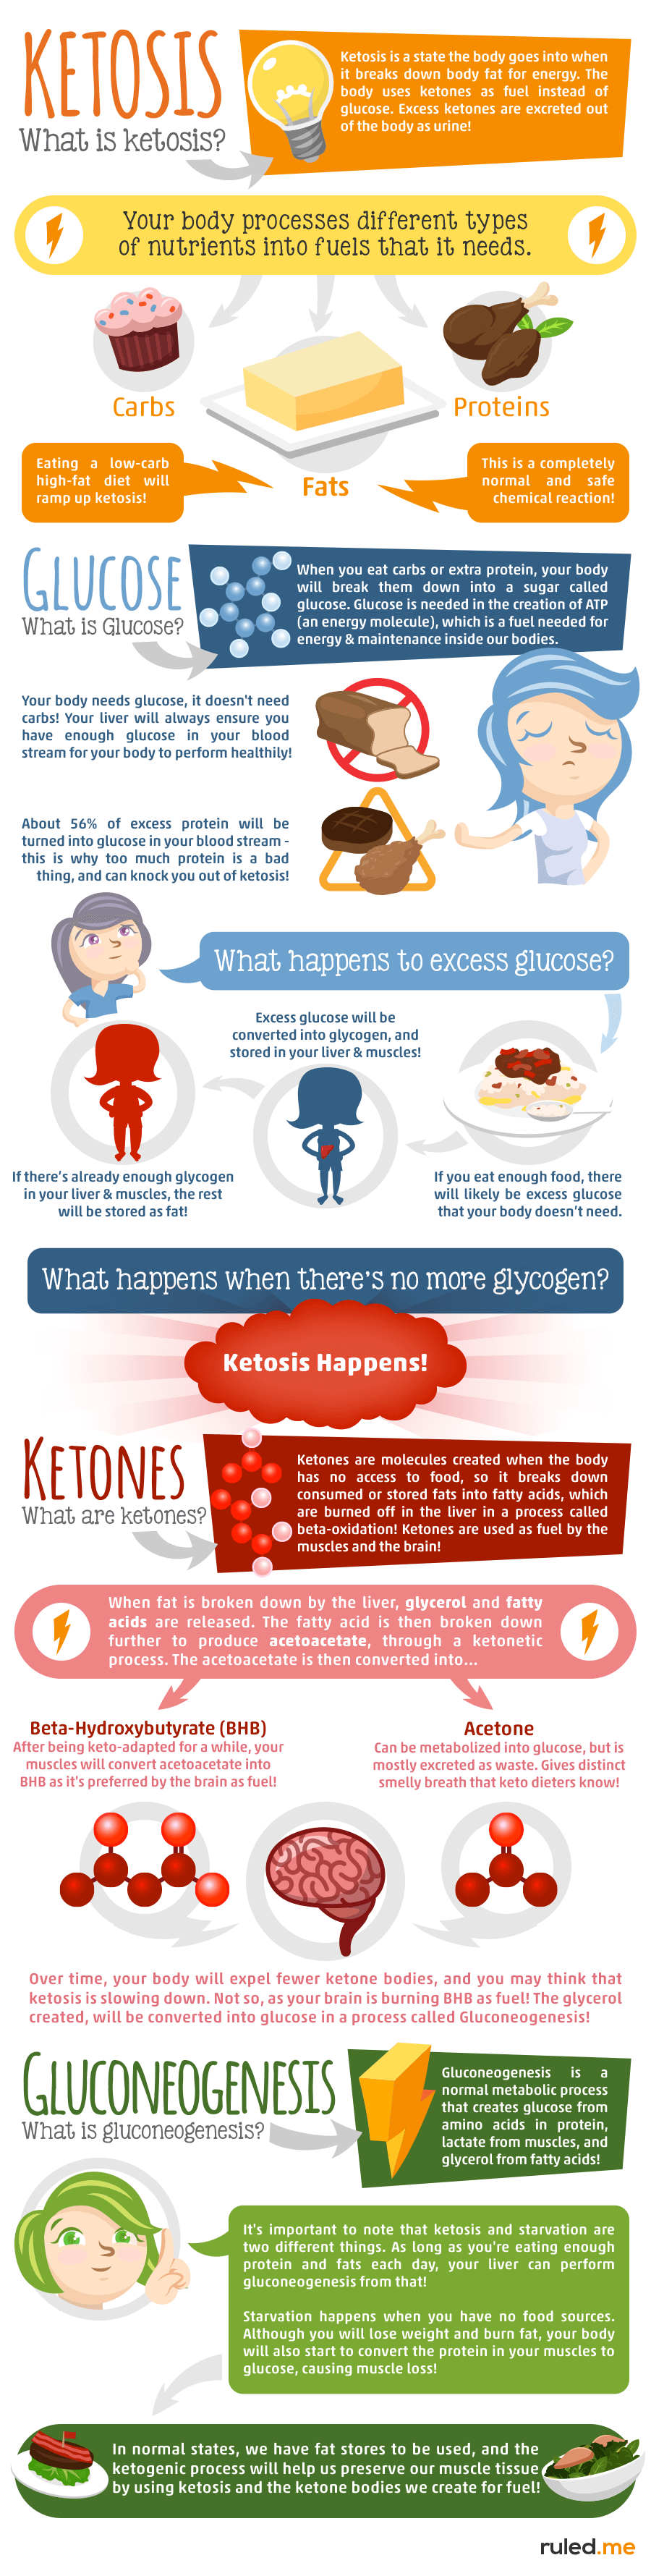 are you always in ketosis on keto diet